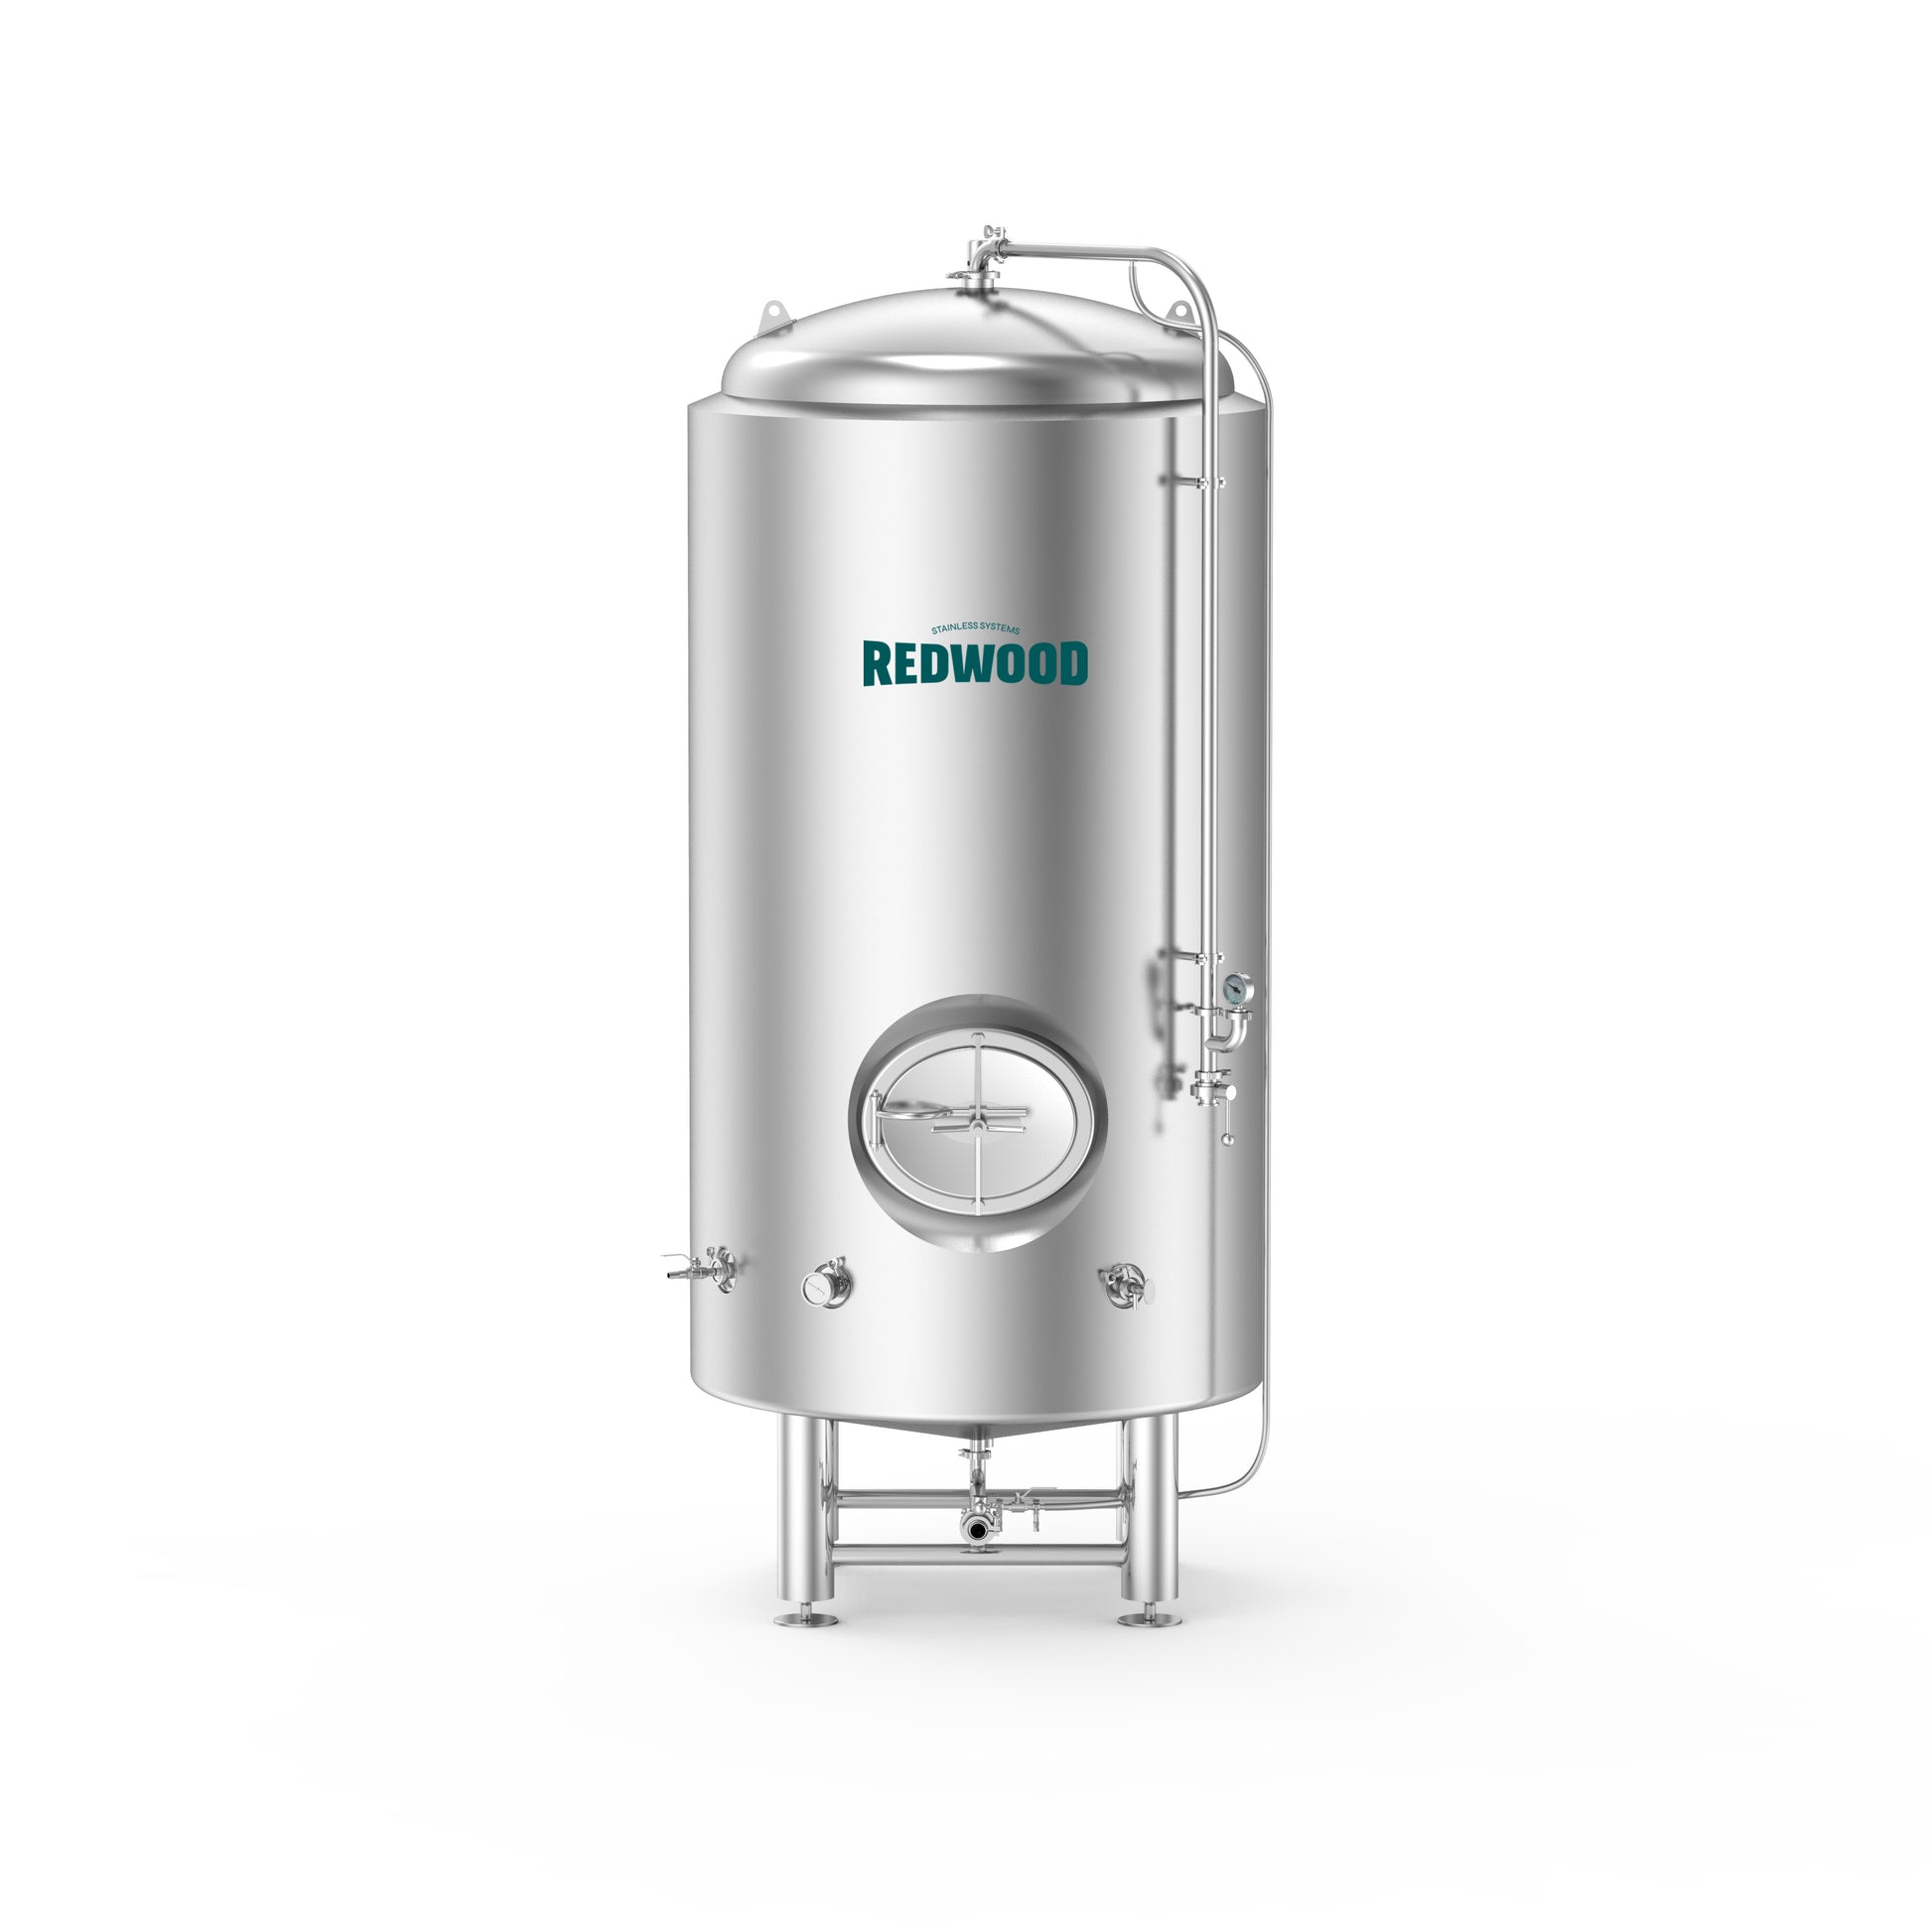 Redwood branded stainless steel bright beer tank with high-efficiency polyurethane foam insulation, featuring sanitary construction with a polished interior for optimal cleanliness. Includes high-quality TIG welded pipes, certified valves, and fittings. Customizable according to specifications, designed for rigorous use with a 120% overhead space and separate glycol jackets for precision temperature control.